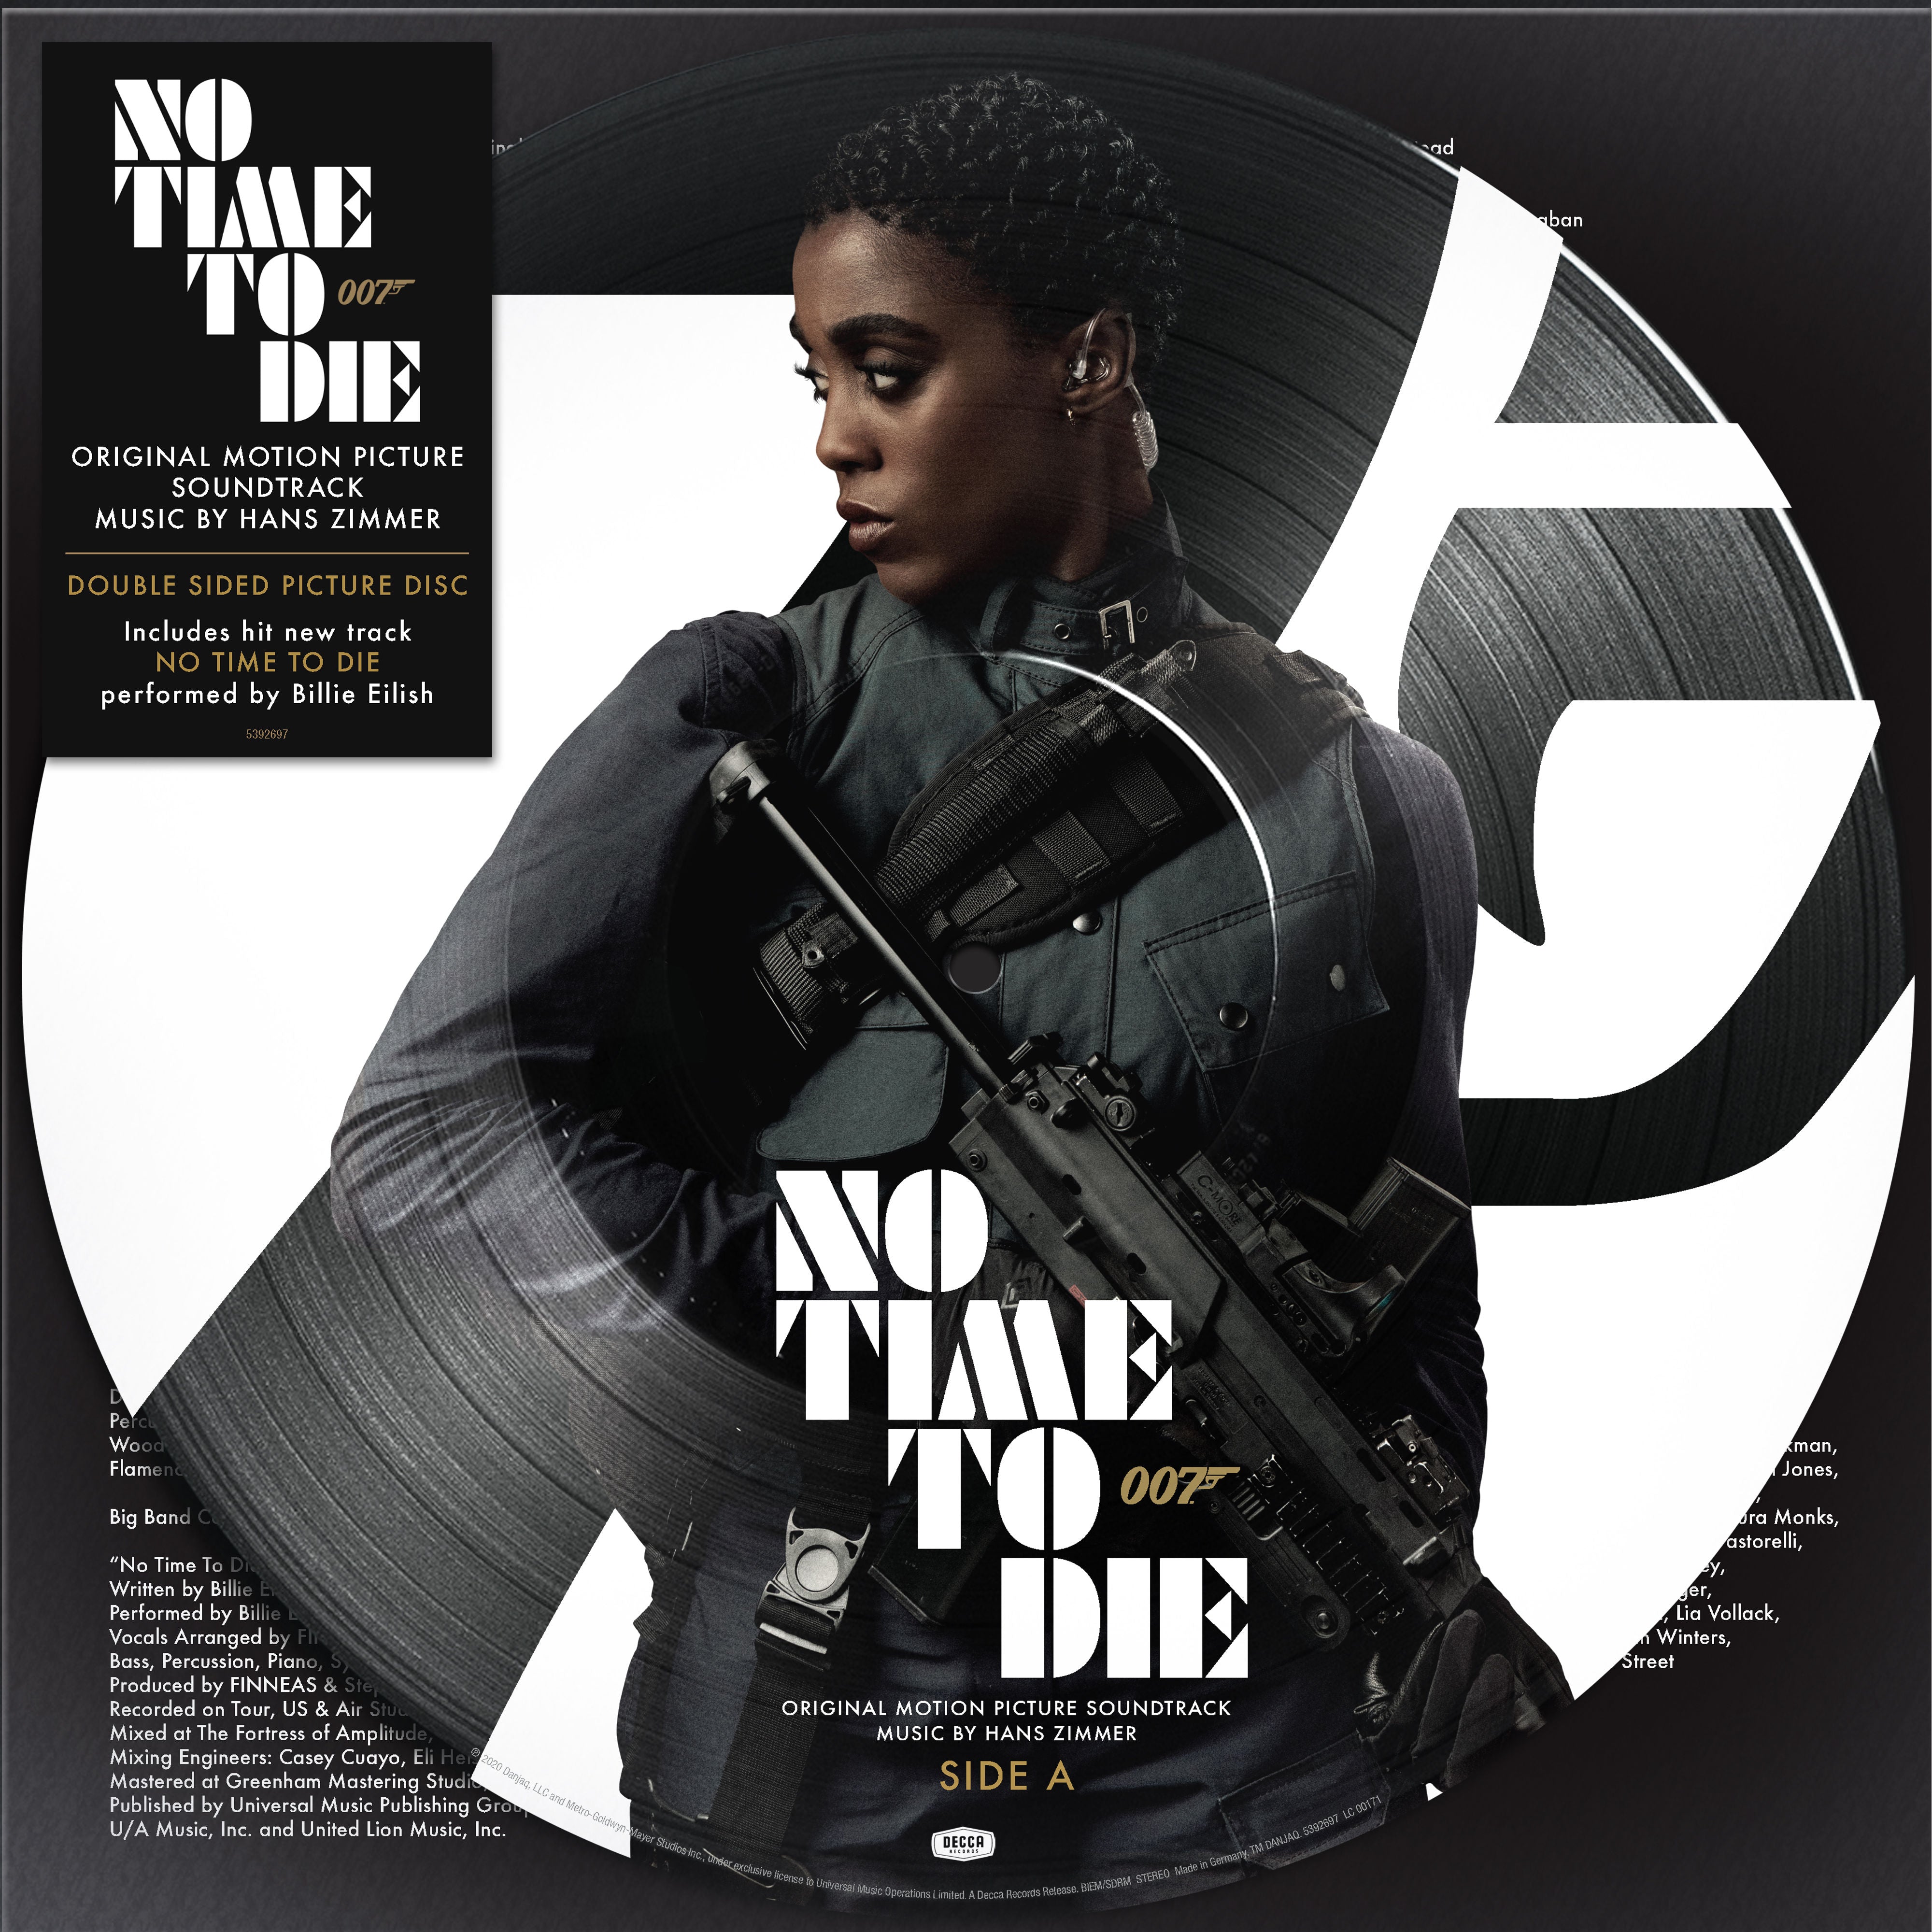 Hans Zimmer - No Time To Die: Limited Edition (Nomi) Picture Disc Vinyl LP